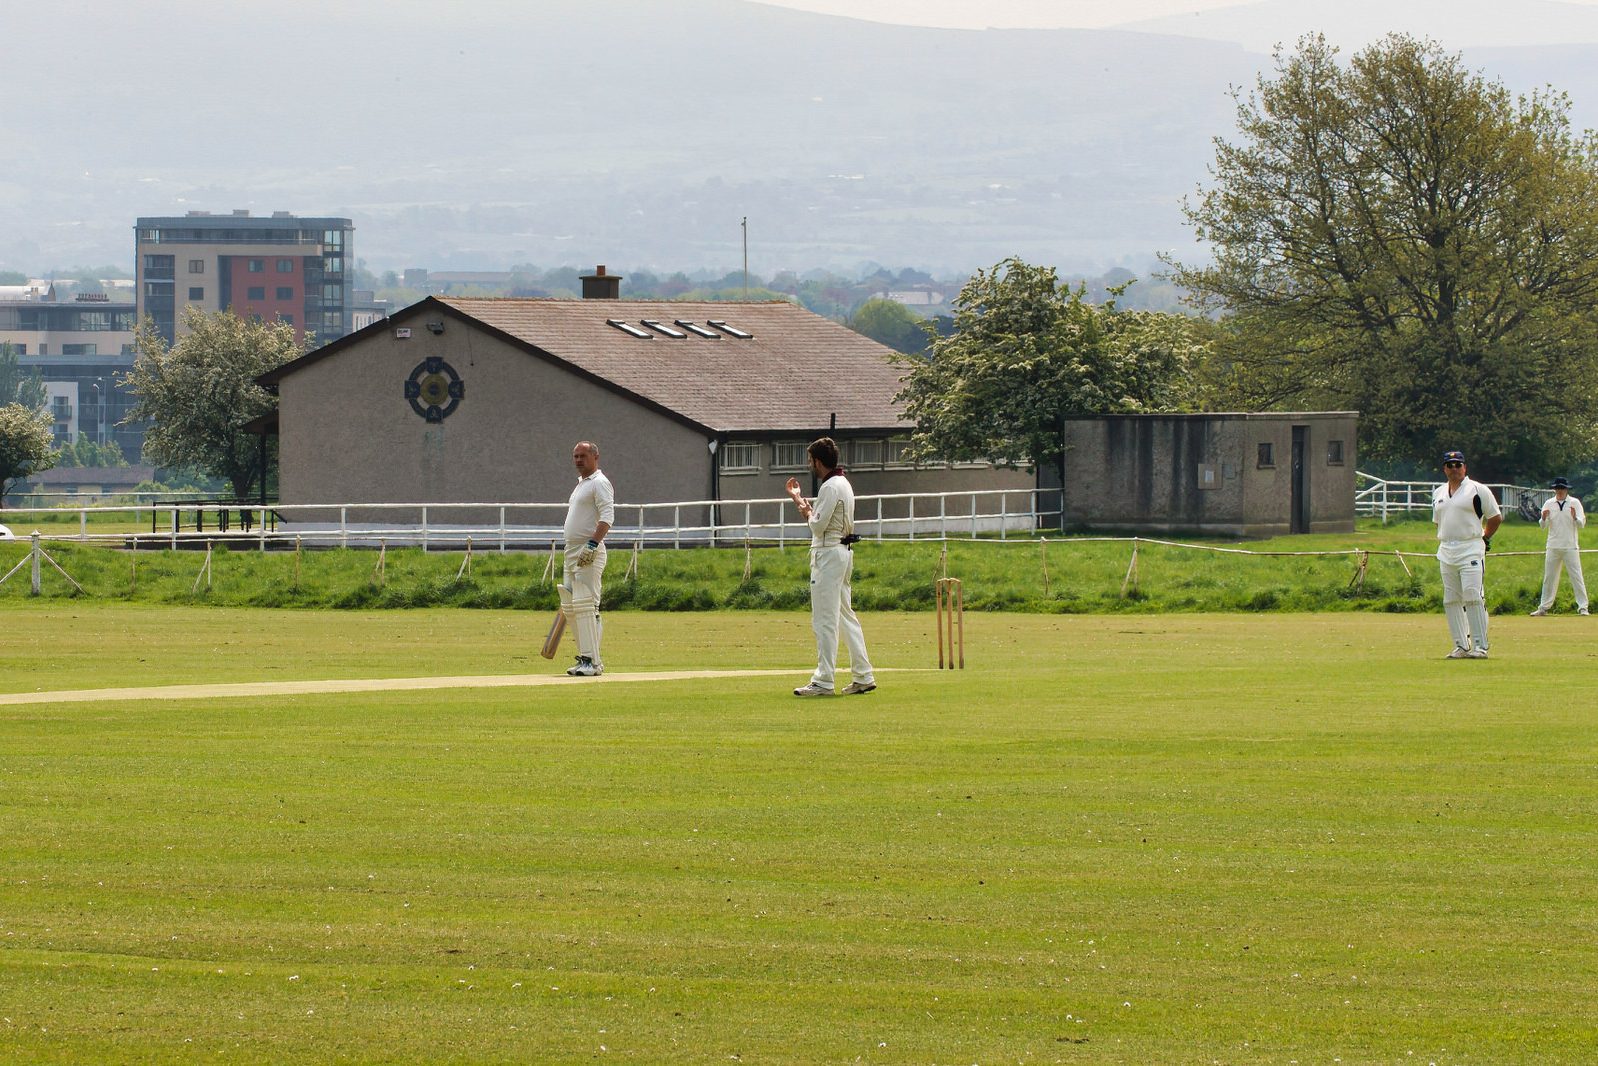 TWO CRICKET CLUBS IN PHOENIX PARK NEAR THE WELLINGTON MONUMENT 022